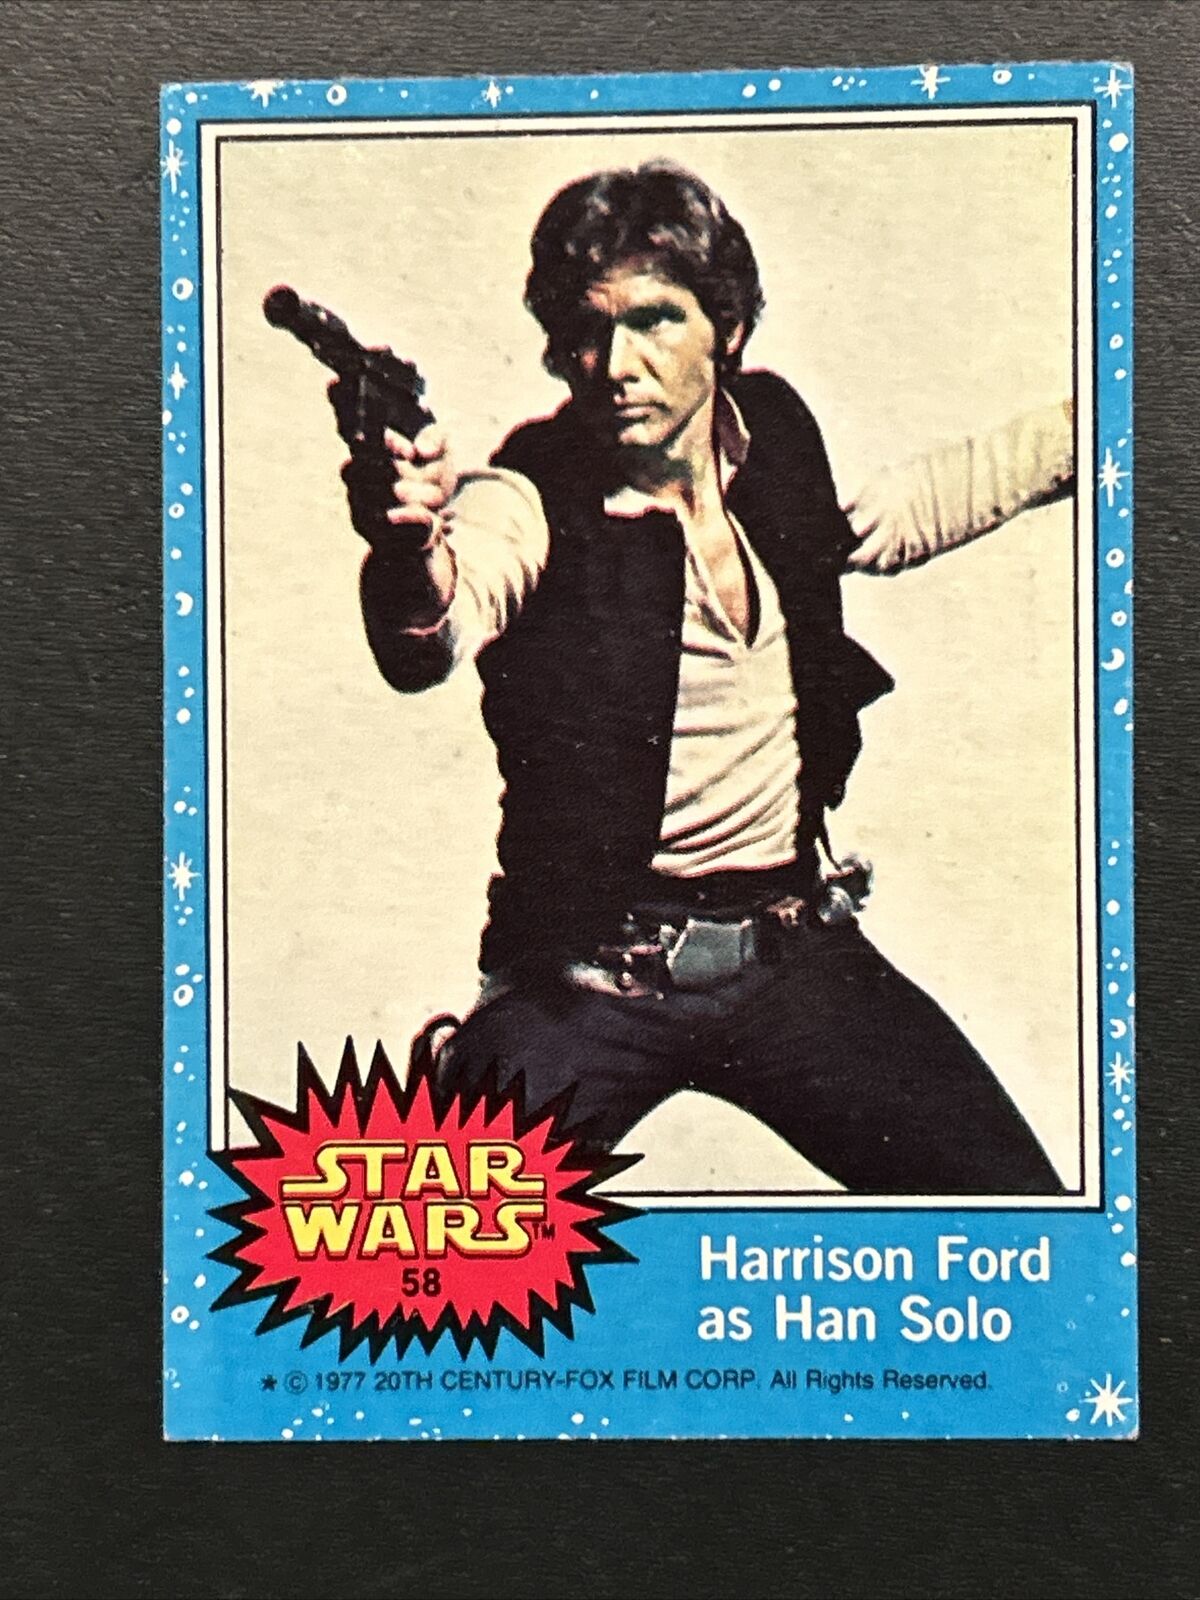 1977 Topps Star Wars Harrison Ford As Han Solo Movie Card #58